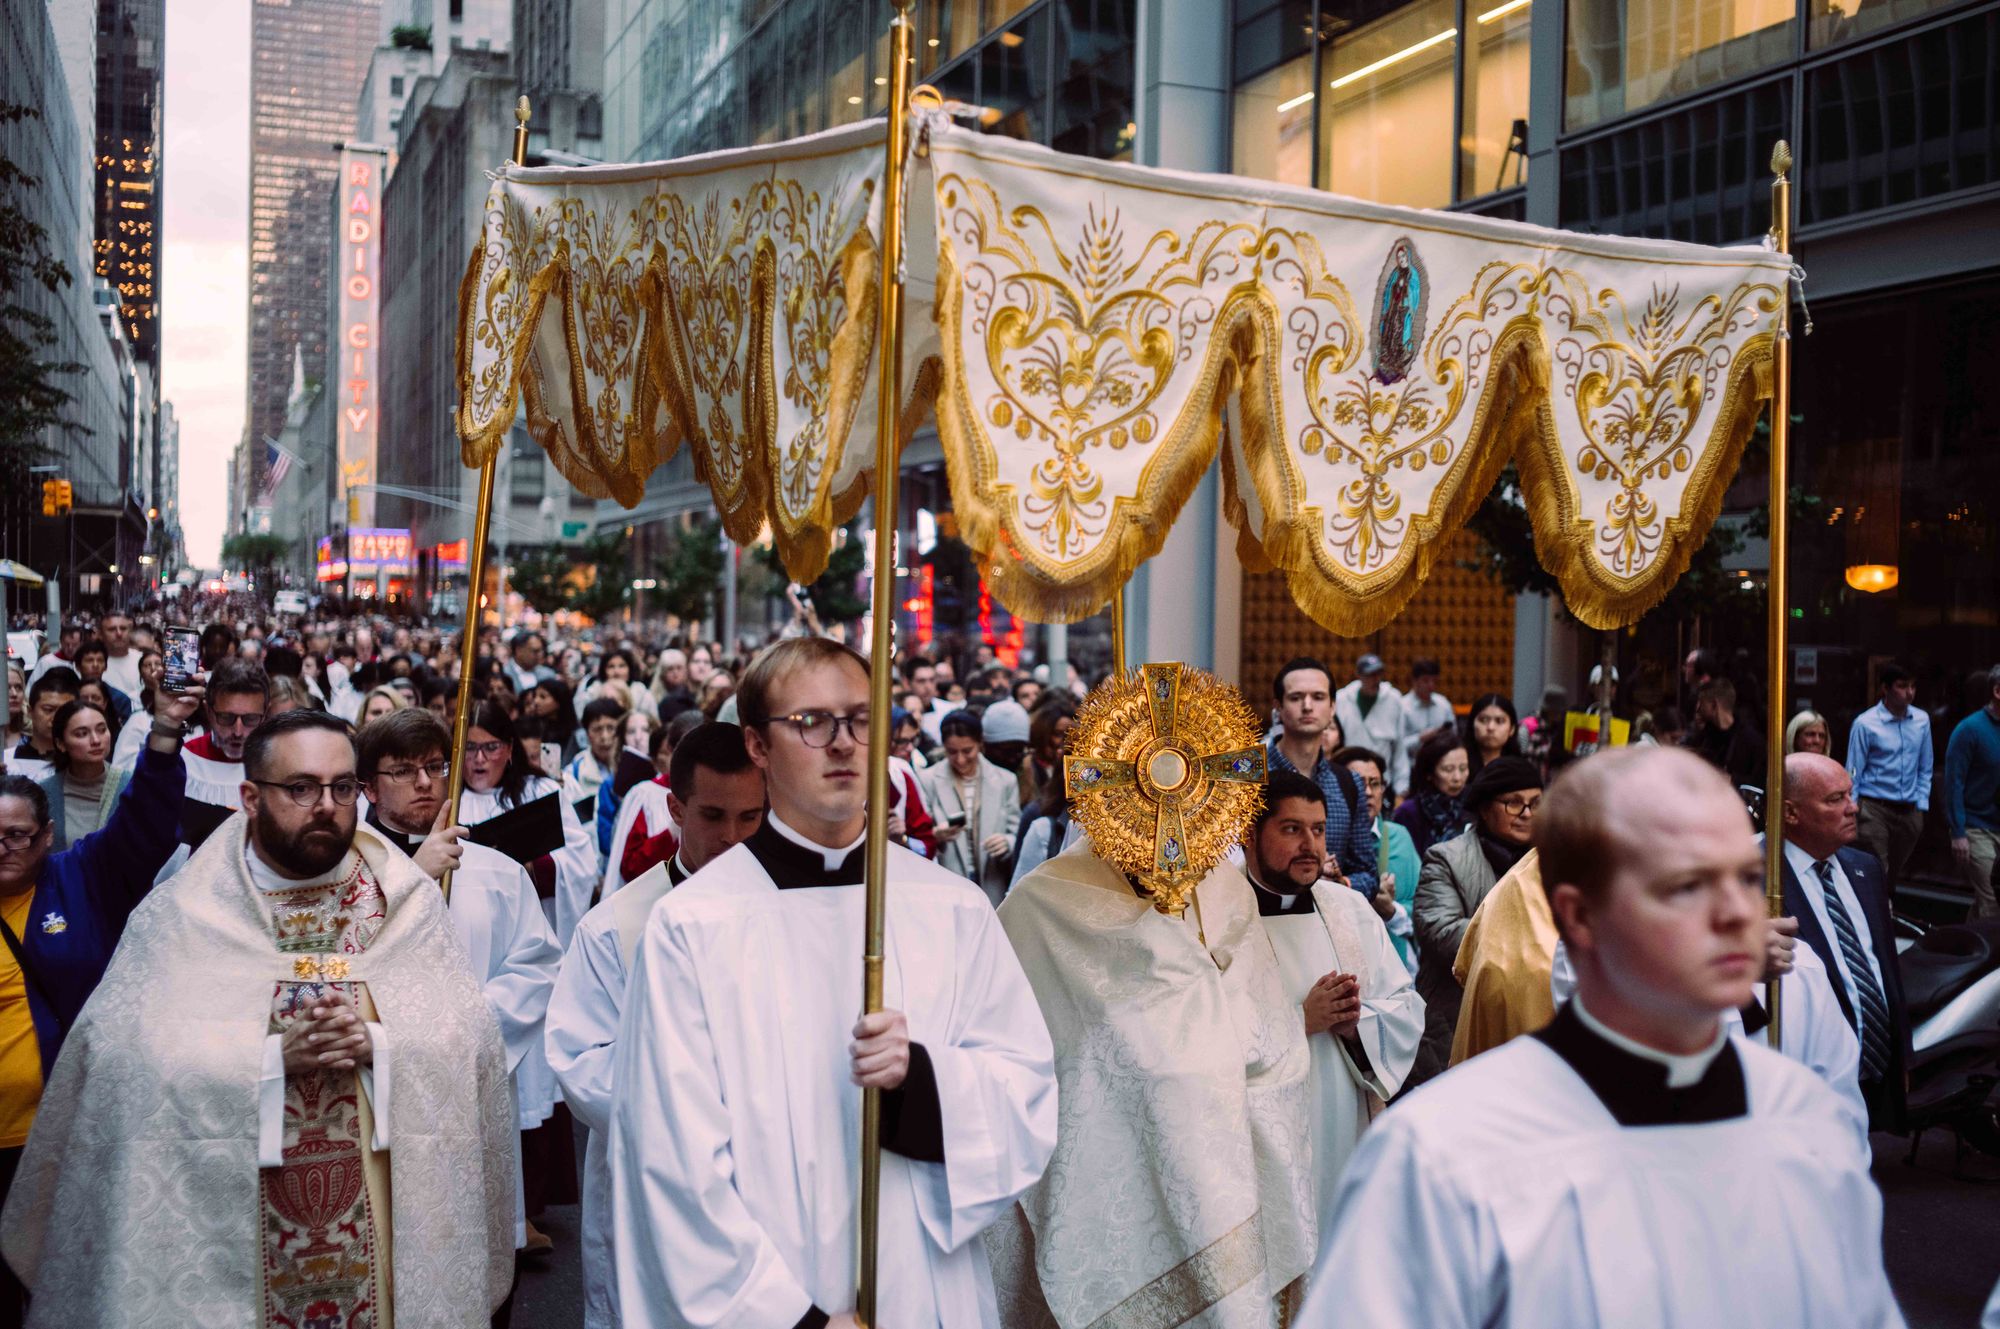 new york city times square, eucharist adoration, st patrick's cathedral nyc, patrick cathedral nyc